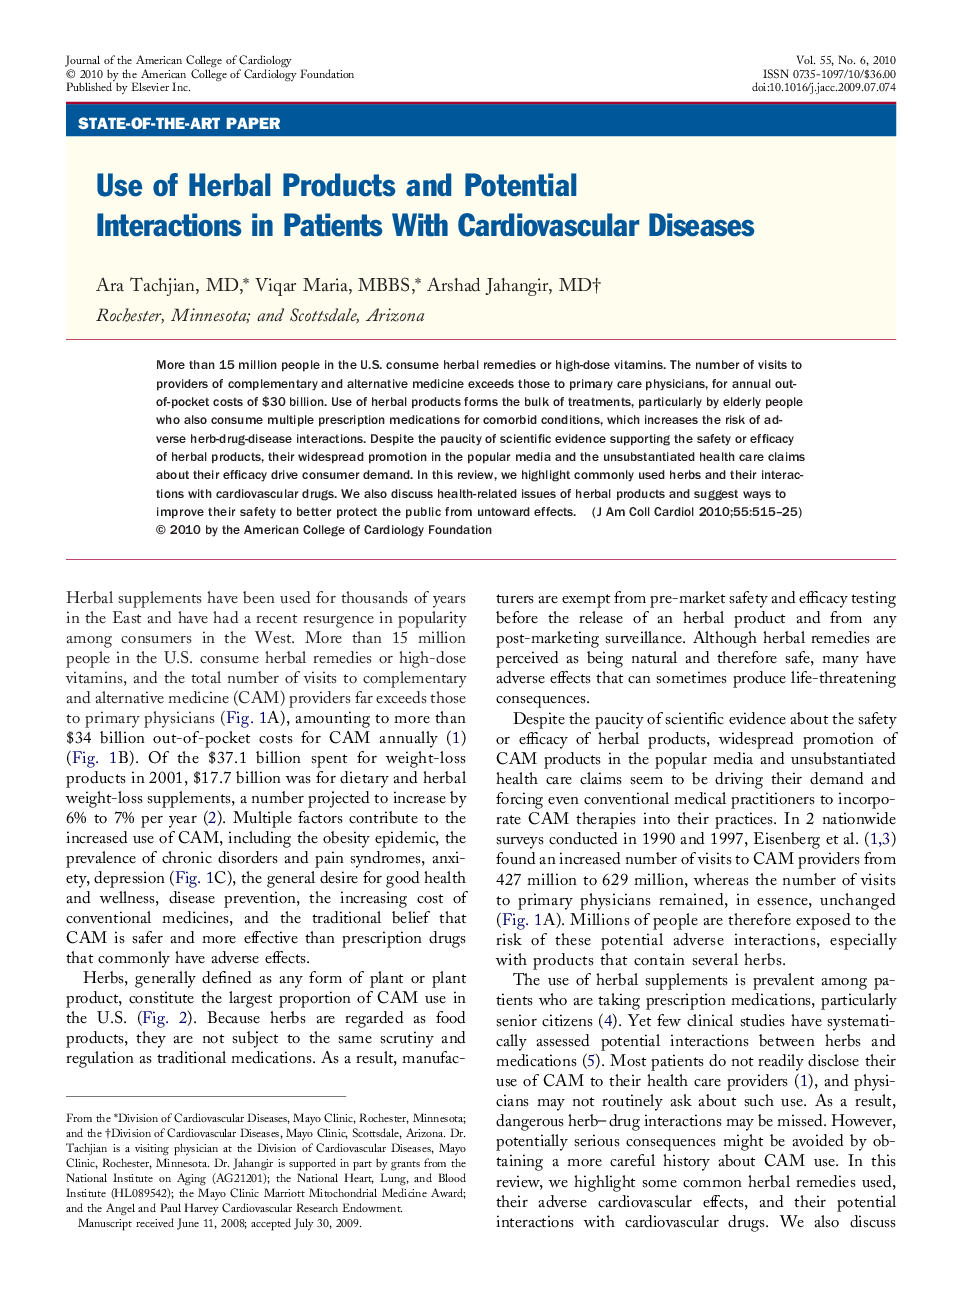 Use of Herbal Products and Potential Interactions in Patients With Cardiovascular Diseases 